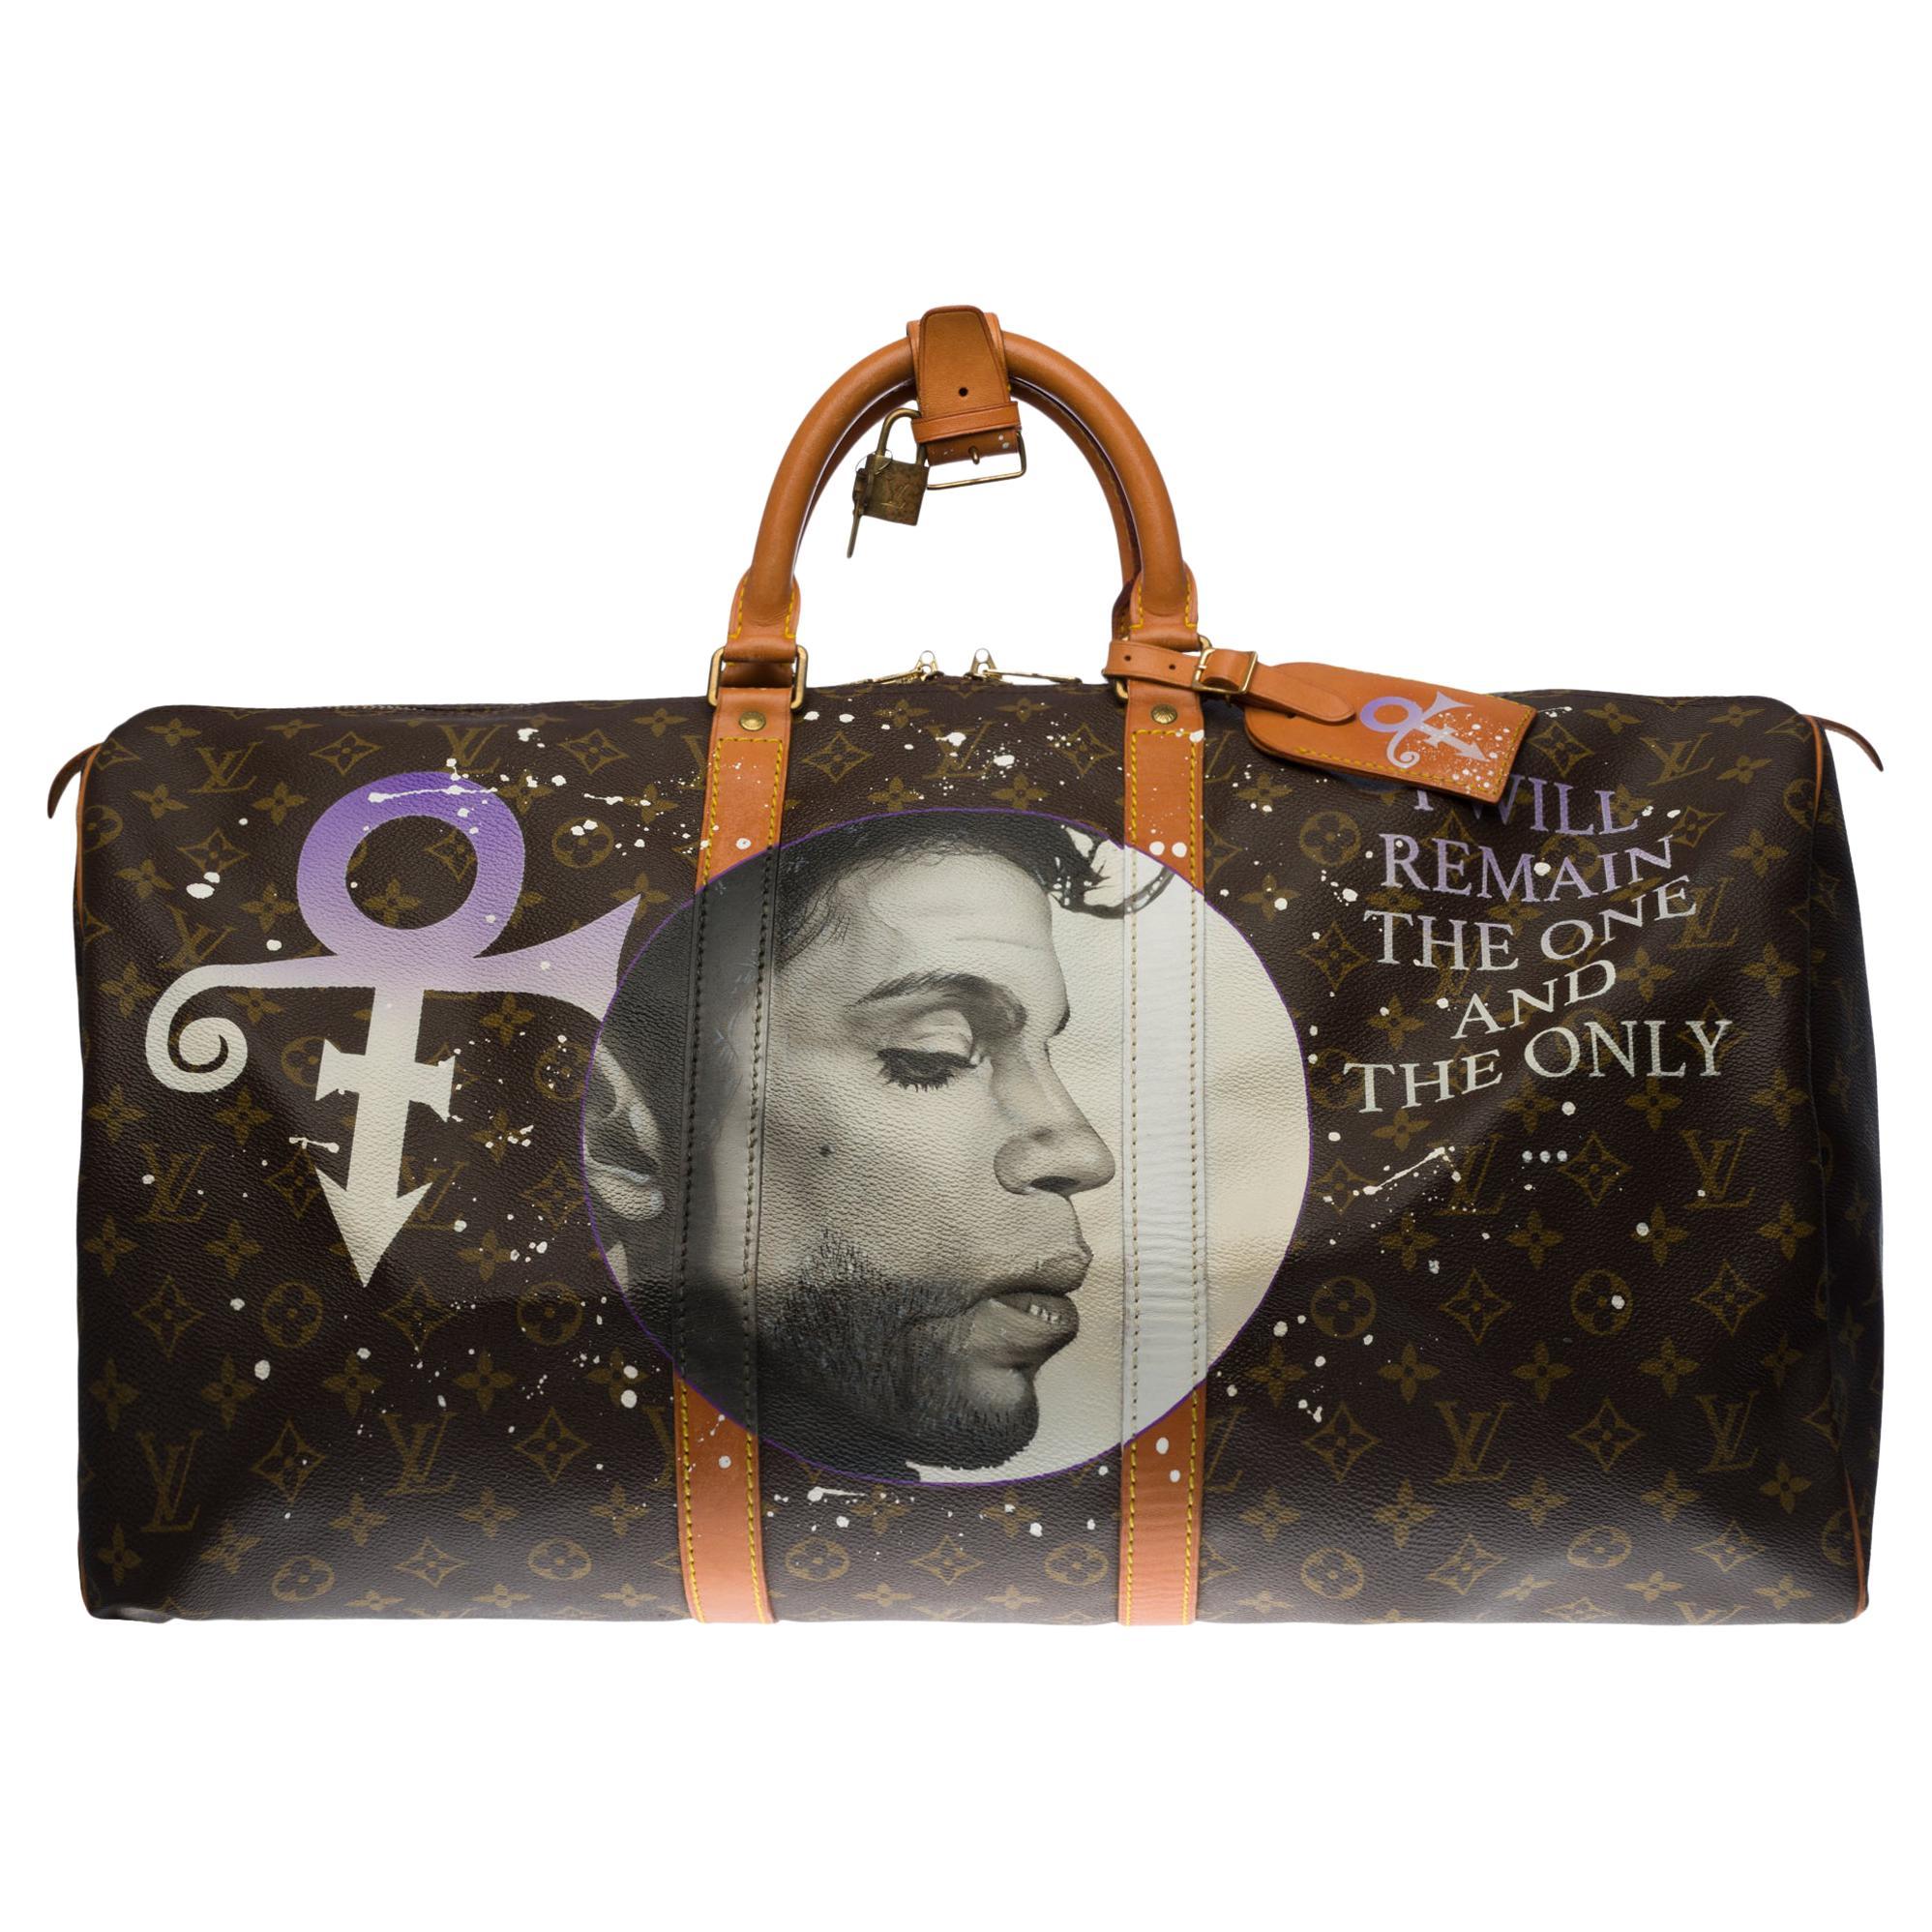 Customized "Prince " Louis Vuitton Keepall 55 travel bag in brown canvas